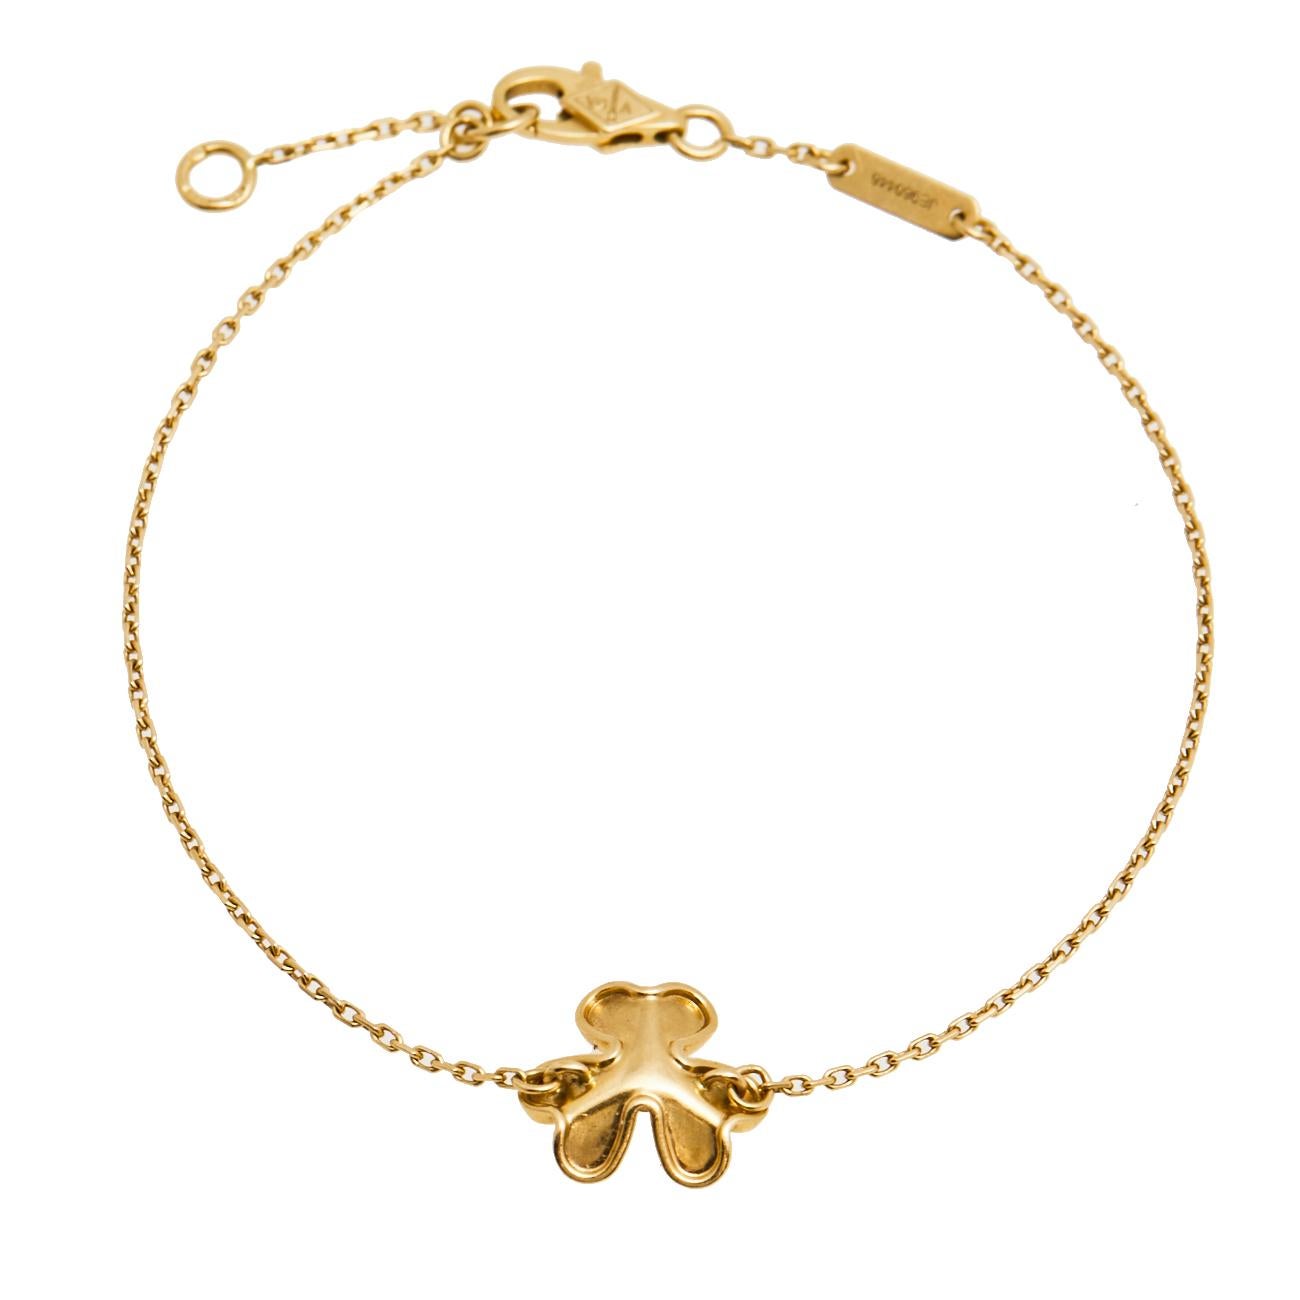 Ideal for everyday use, this beautiful bracelet from Van Cleef & Arpels belongs to their Frivole collection which is all about demure floral motifs designed with airy aesthetics. An ideal companion to your feminine spirit, the bracelet features an